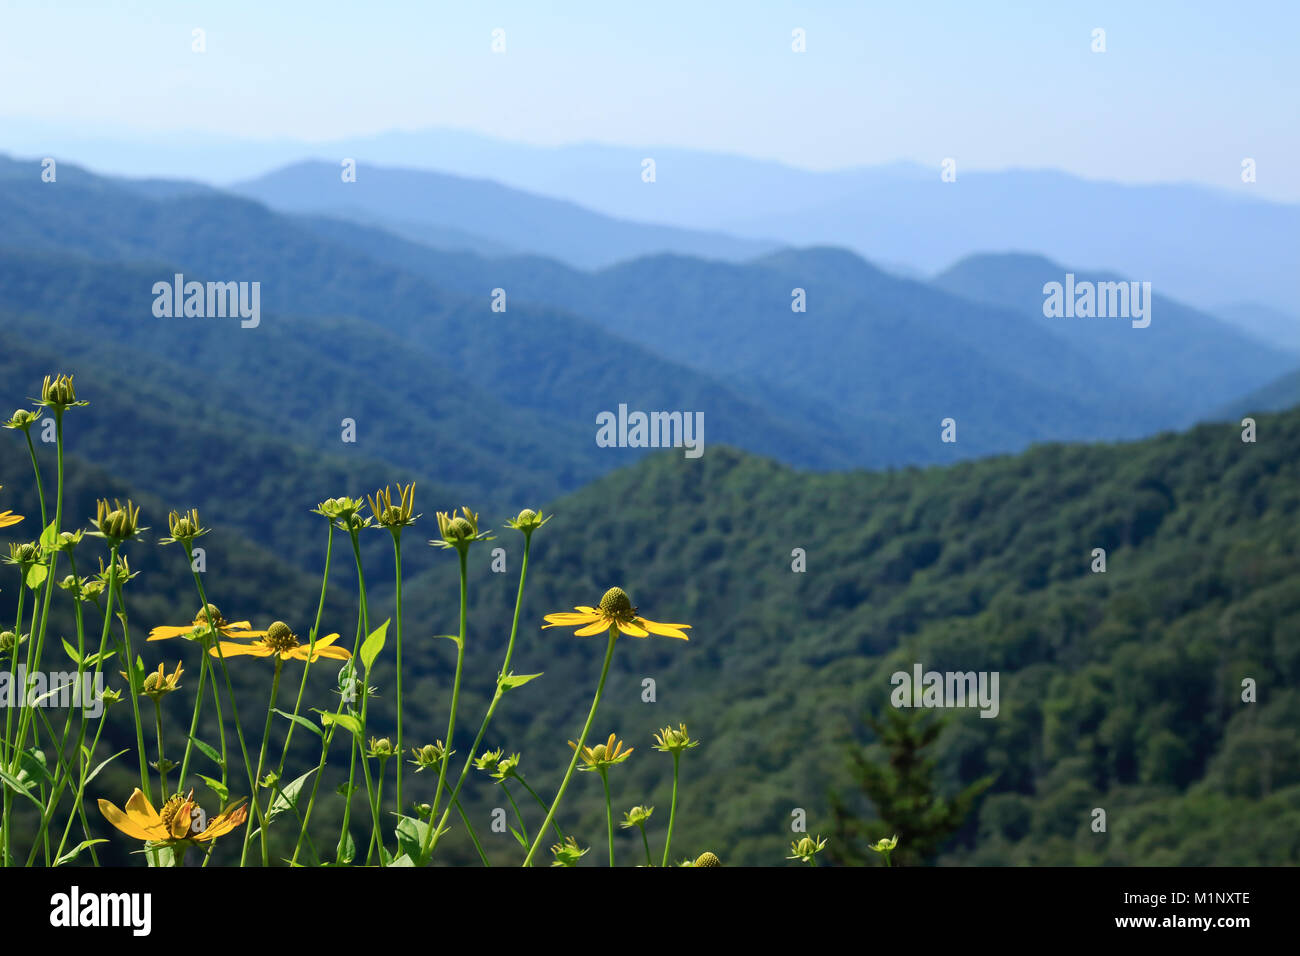 Great Smoky Mountains in blue haze with Maryland Golden Aster flowers in foreground in the National Park in North Carolina, USA Stock Photo